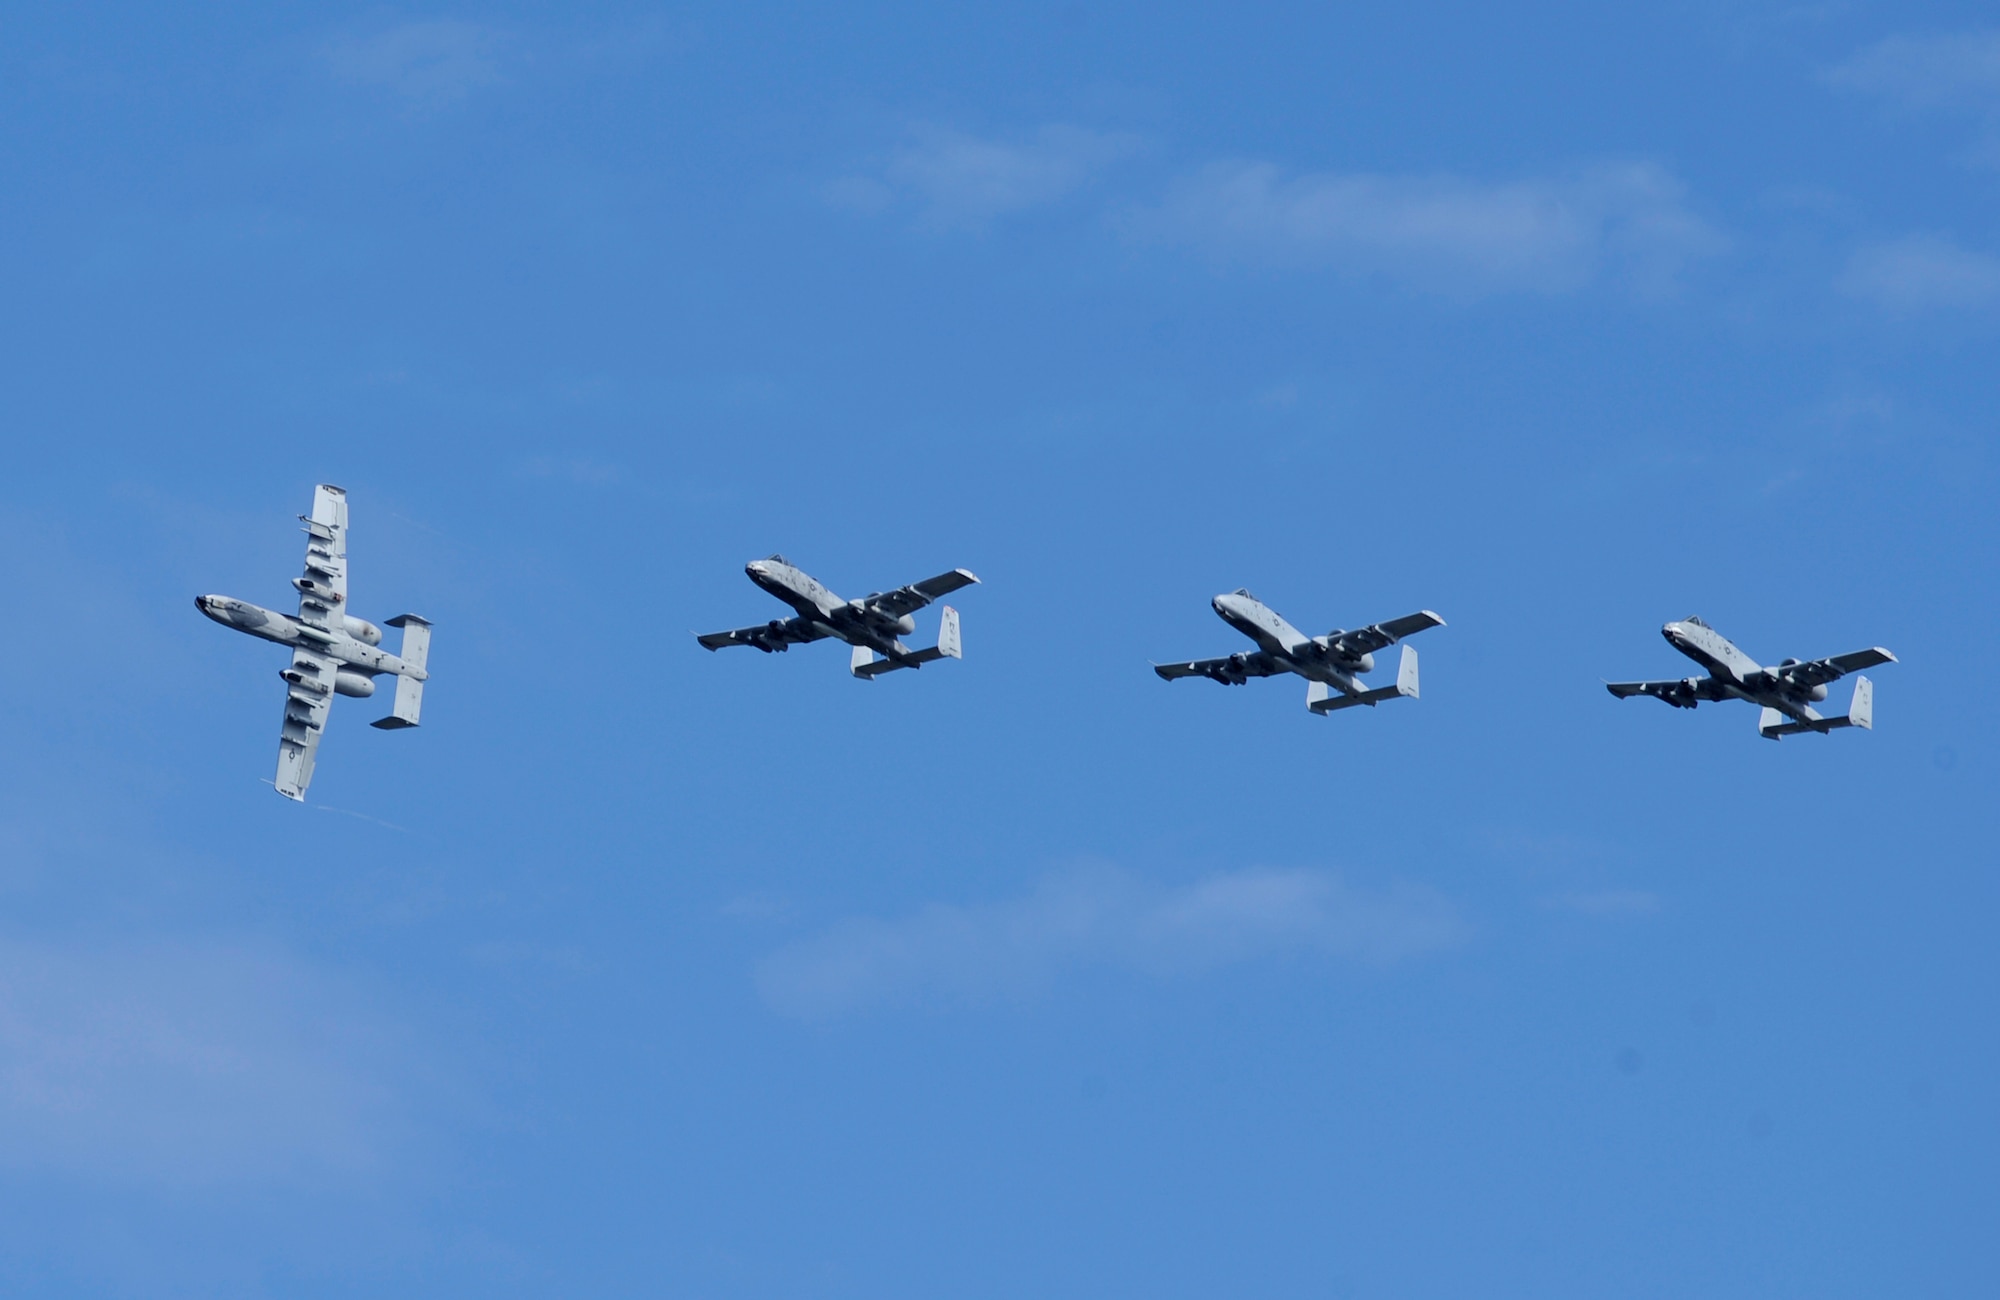 U.S. Air Force A-10C Thunderbolt IIs from Moody Air Force Base, Ga., fly over the flightline at Tyndall Air Force Base, Fla., Oct. 6, 2016. Approximately 30 aircraft were ordered to evacuate after officials at the 23rd Wing assessed the threat of Hurricane Matthew. (U.S. Air Force photo by Senior Airman Solomon Cook/Released)